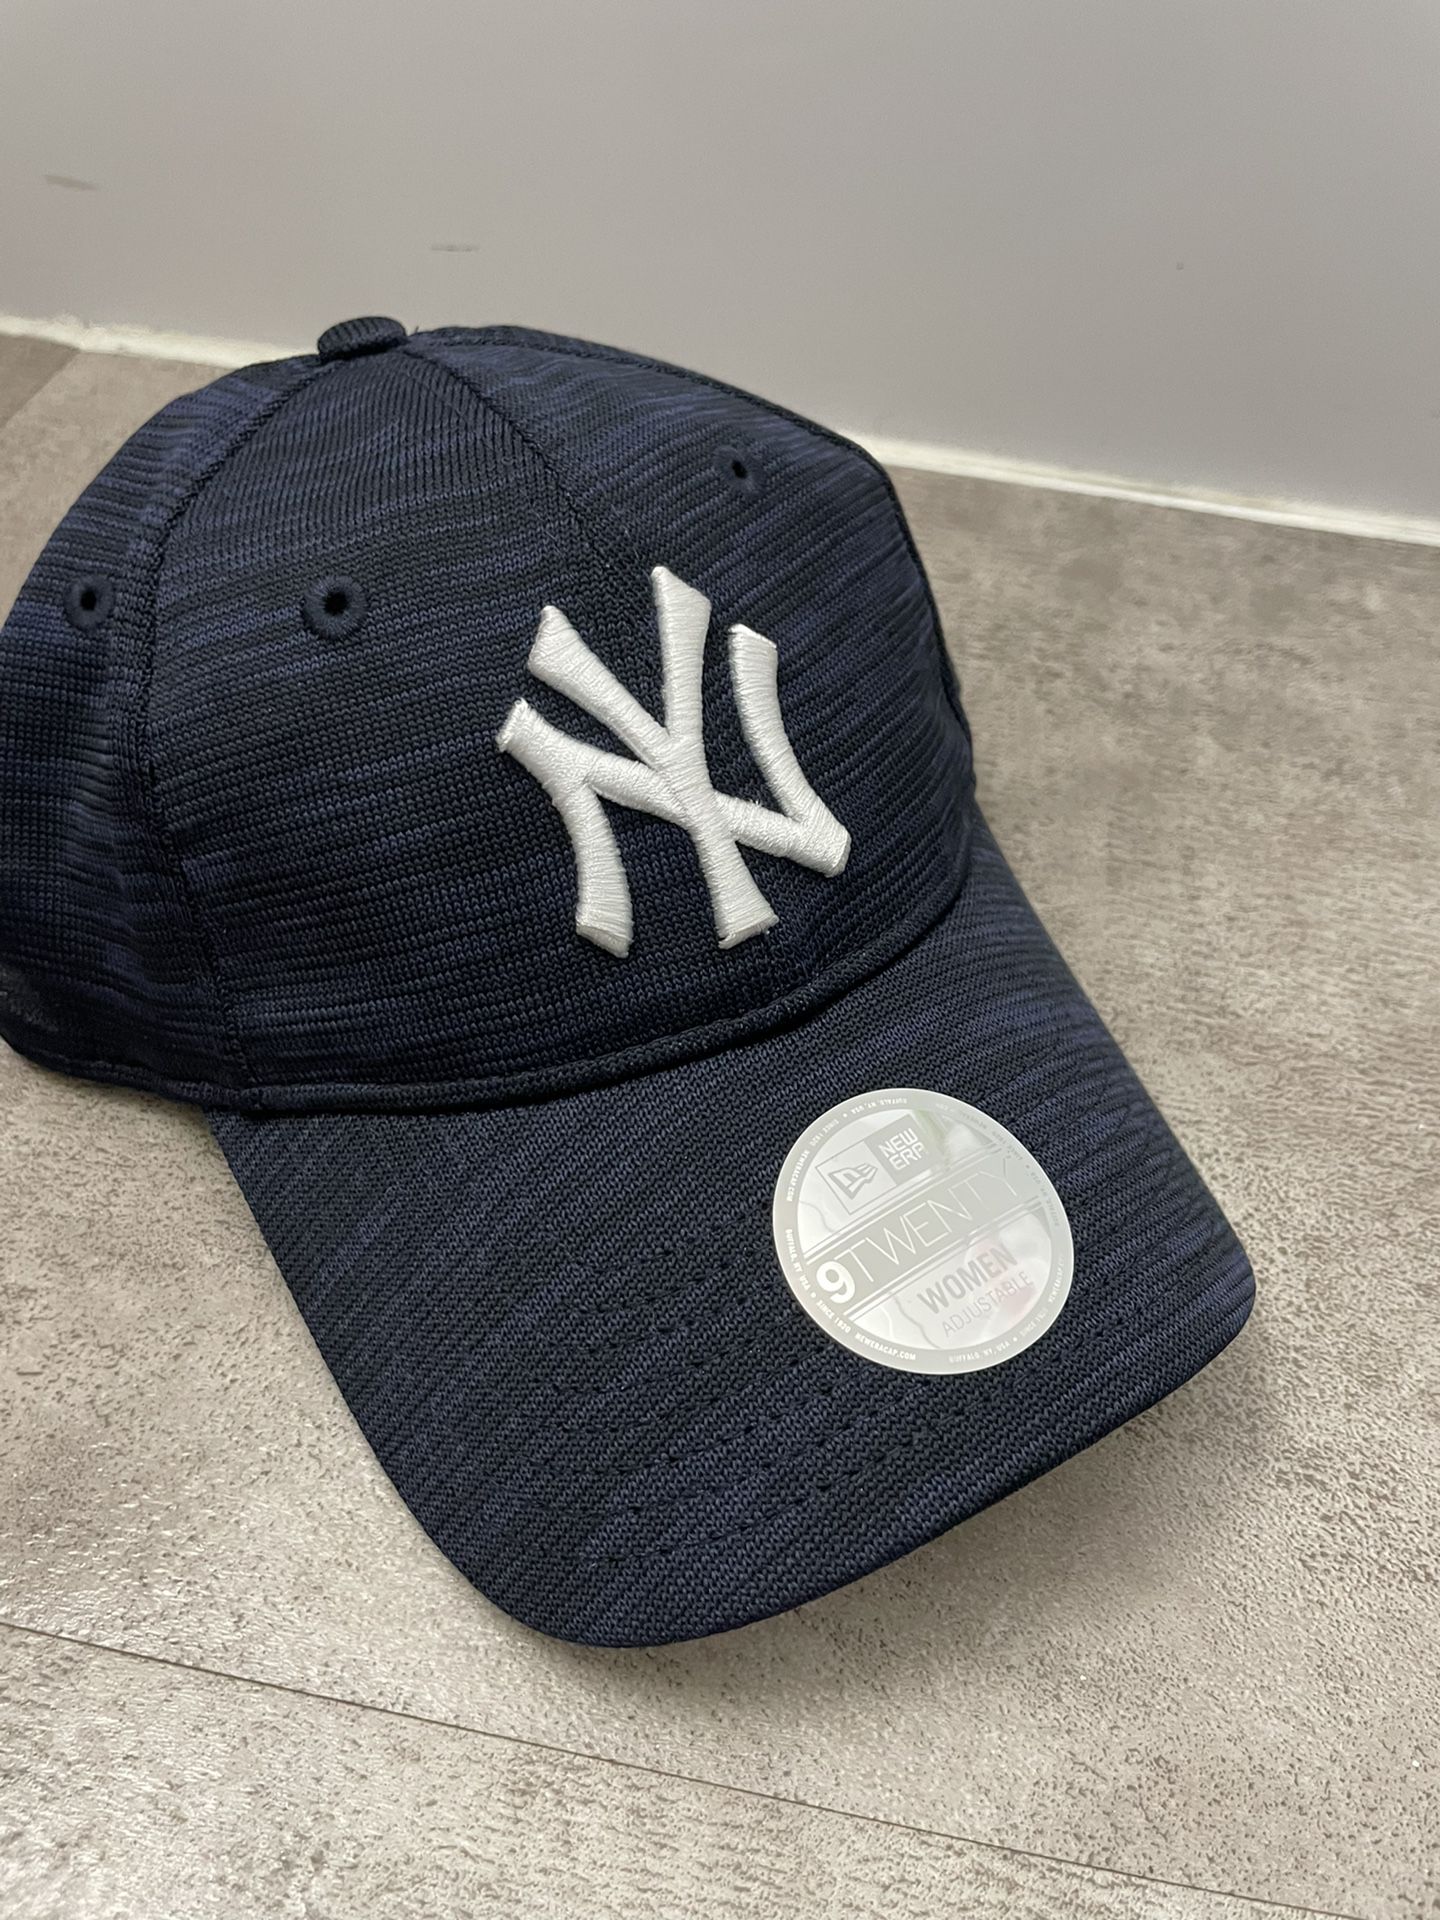 Yankees Stuff for Sale in New York, NY - OfferUp